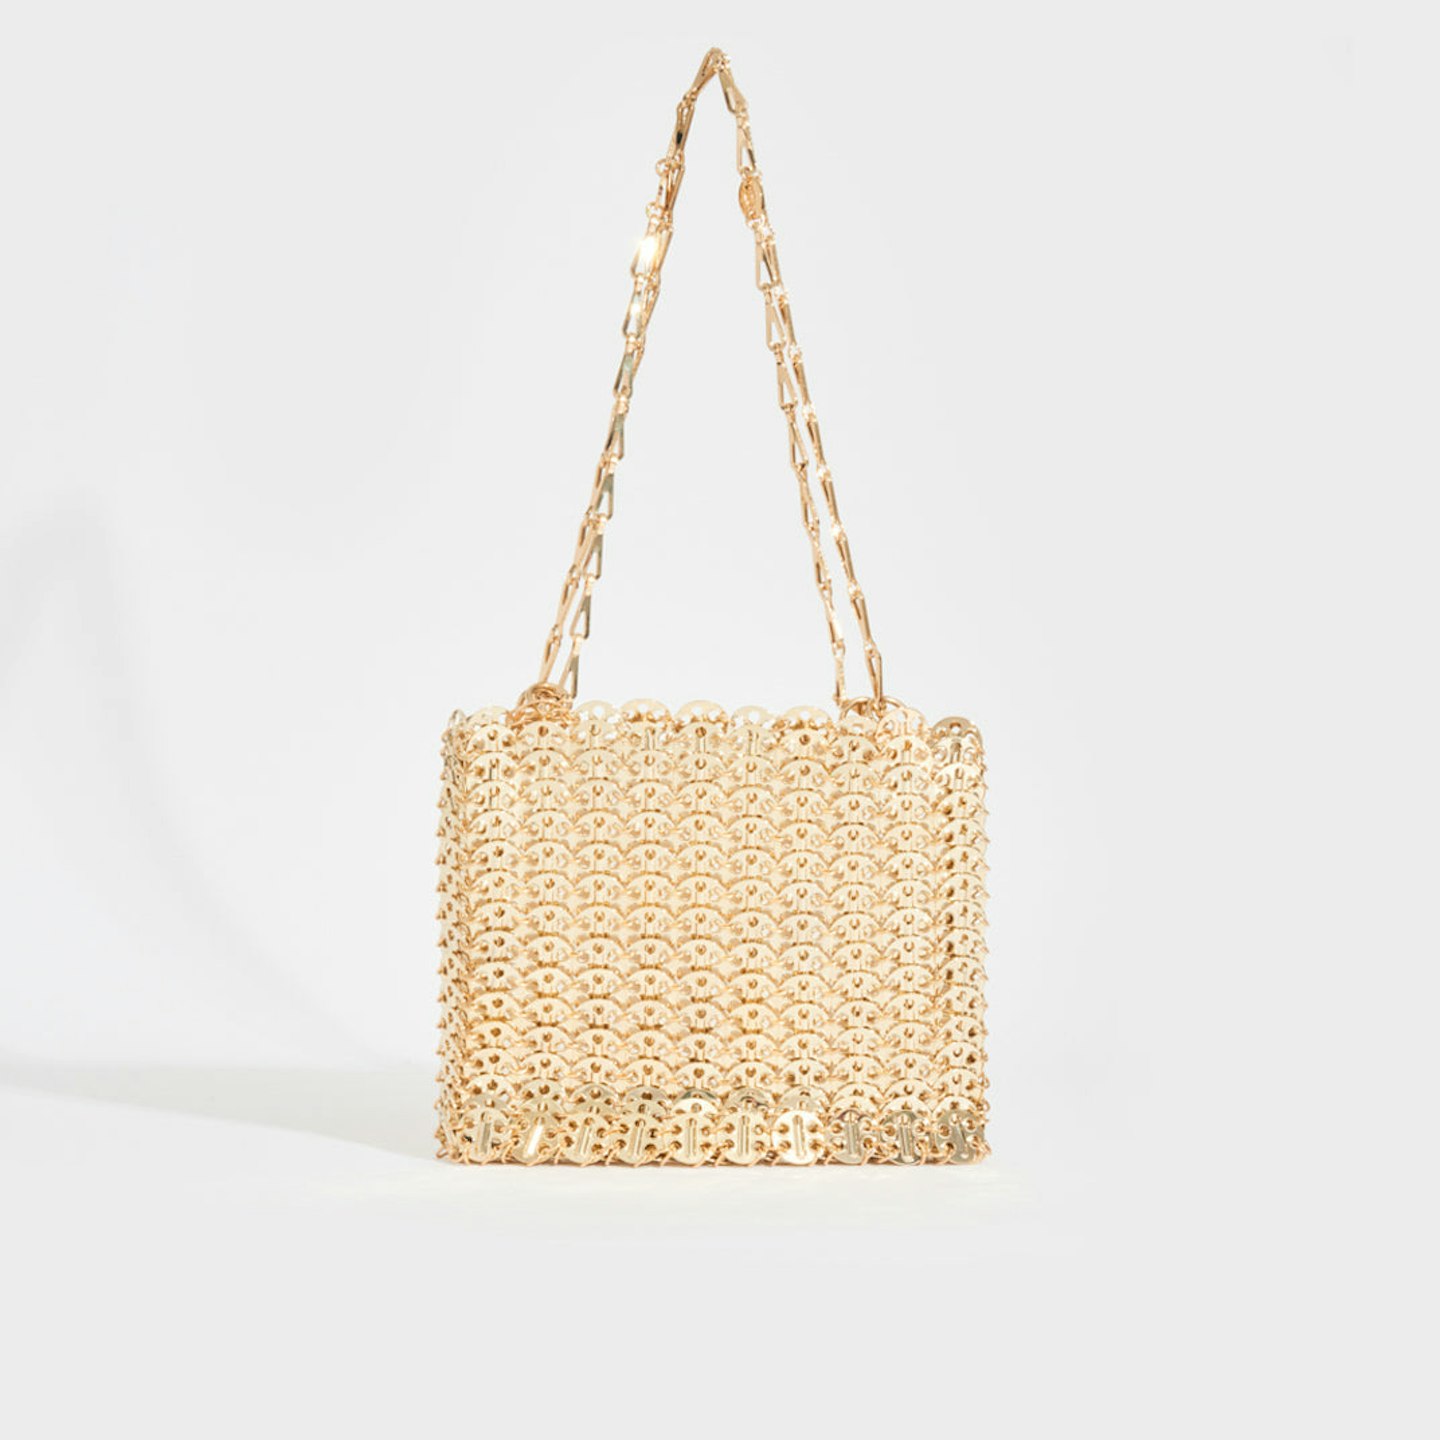 Paco Rabanne, Iconic 1969 Chain Shoulder Bag in Gold